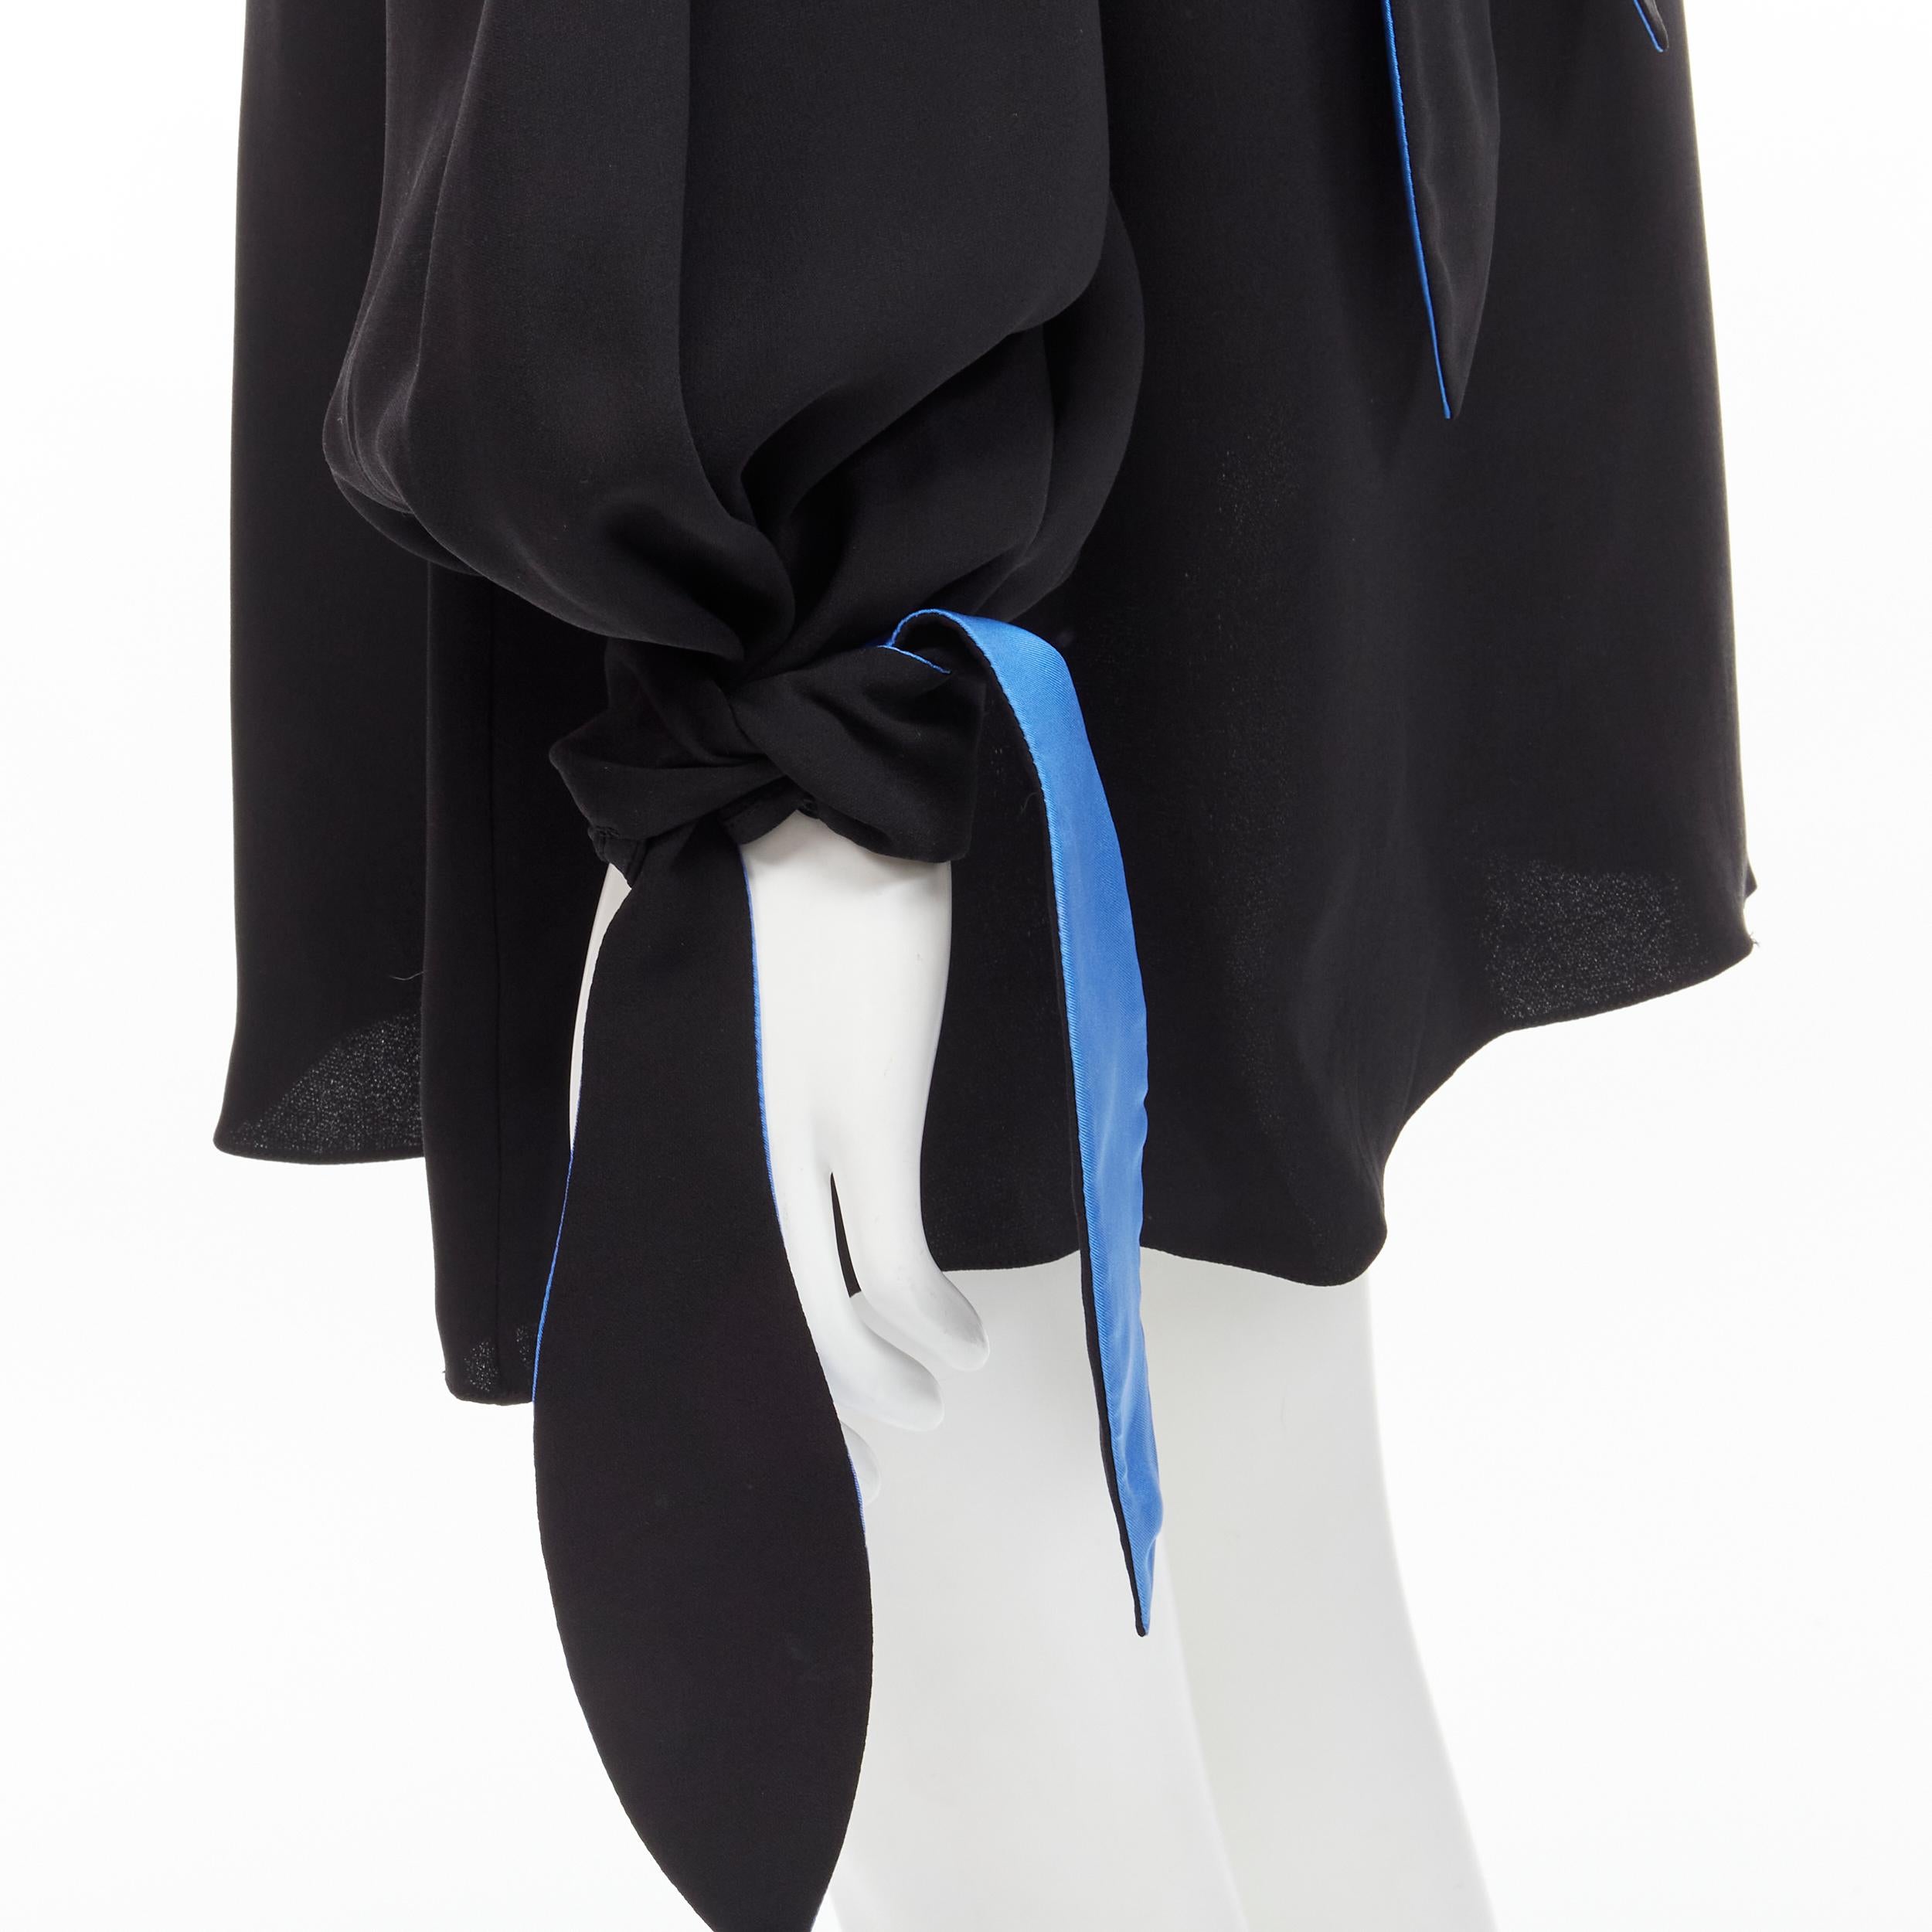 ROKSANDA 100% silk black blue bow tie cuff tunic dress UK8 S 
Reference: JACG/A00020 
Brand: Roksanda 
Material: Silk 
Color: Black 
Pattern: Solid 
Closure: Tie 
Extra Detail: Keyhole back. Self tie at back of neck and at cuff. 
Made in: England